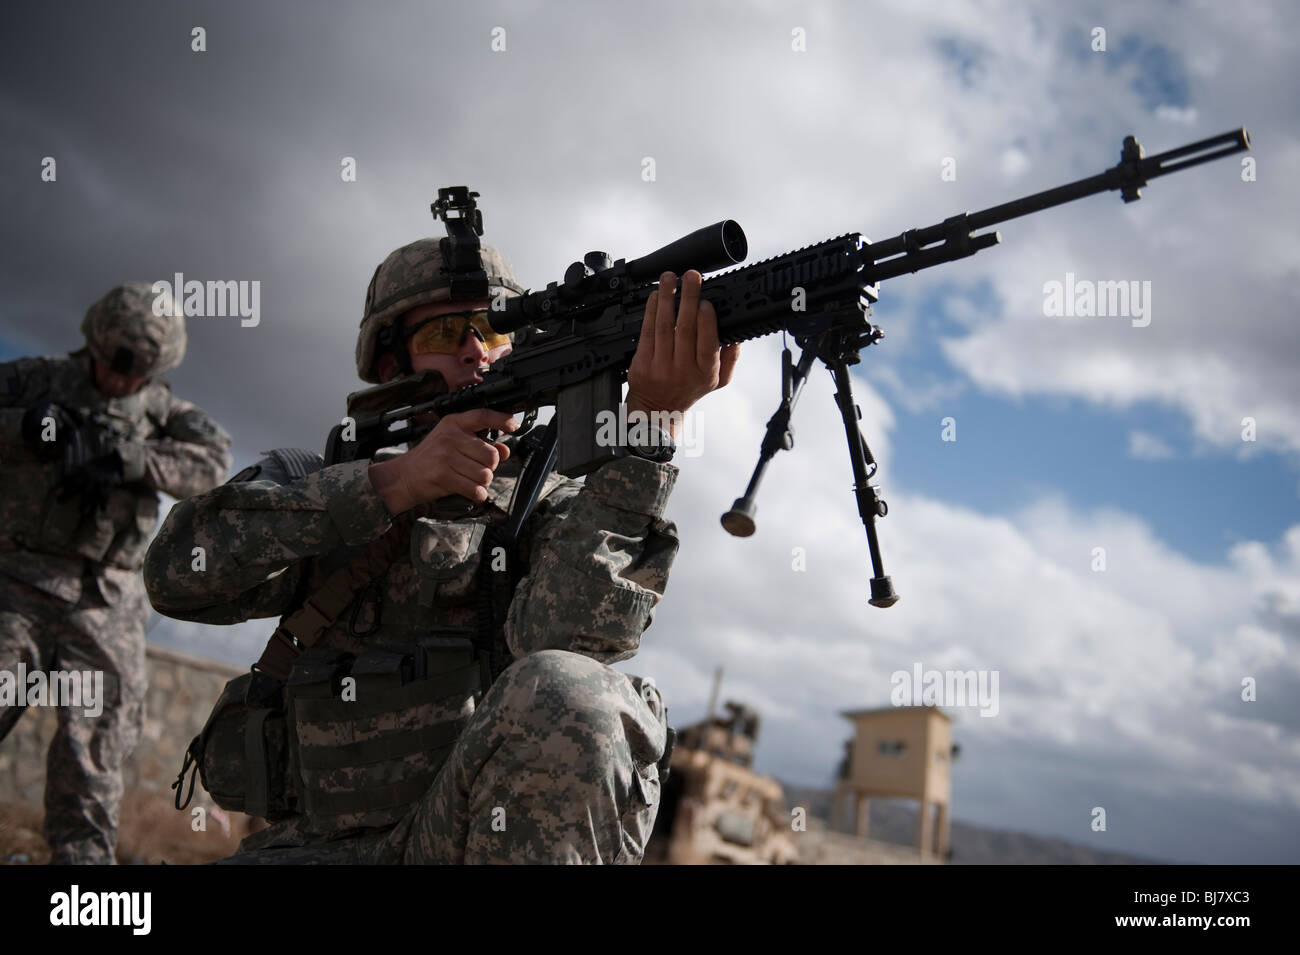 Army Sniper prepares to fire Stock Photo